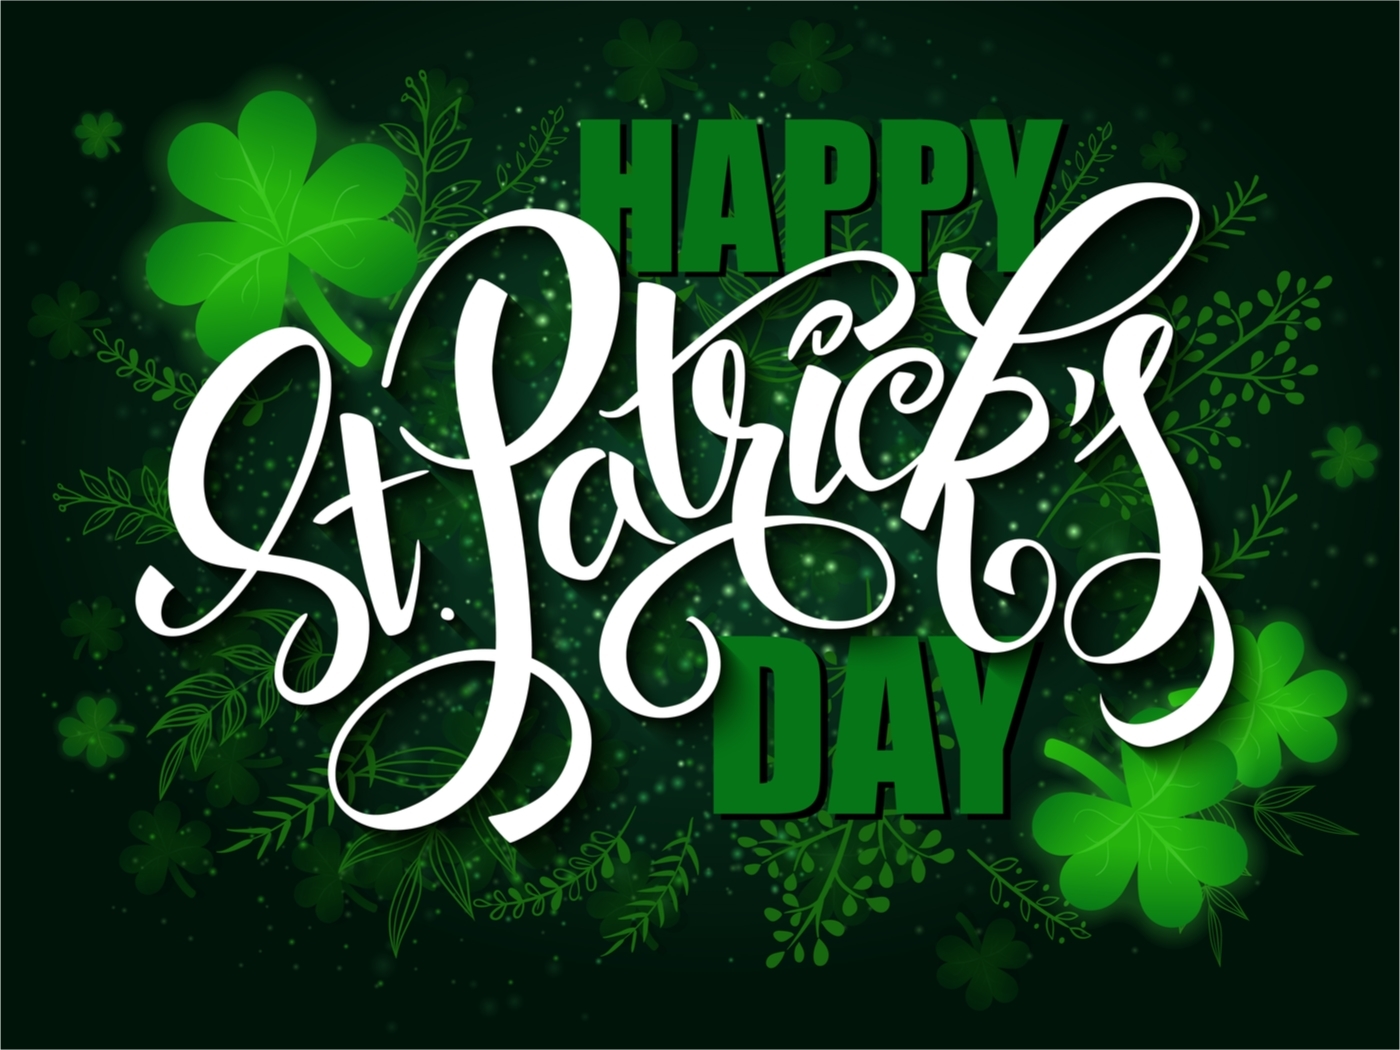 A Digital Marketer’s Look into St. Patrick’s Day